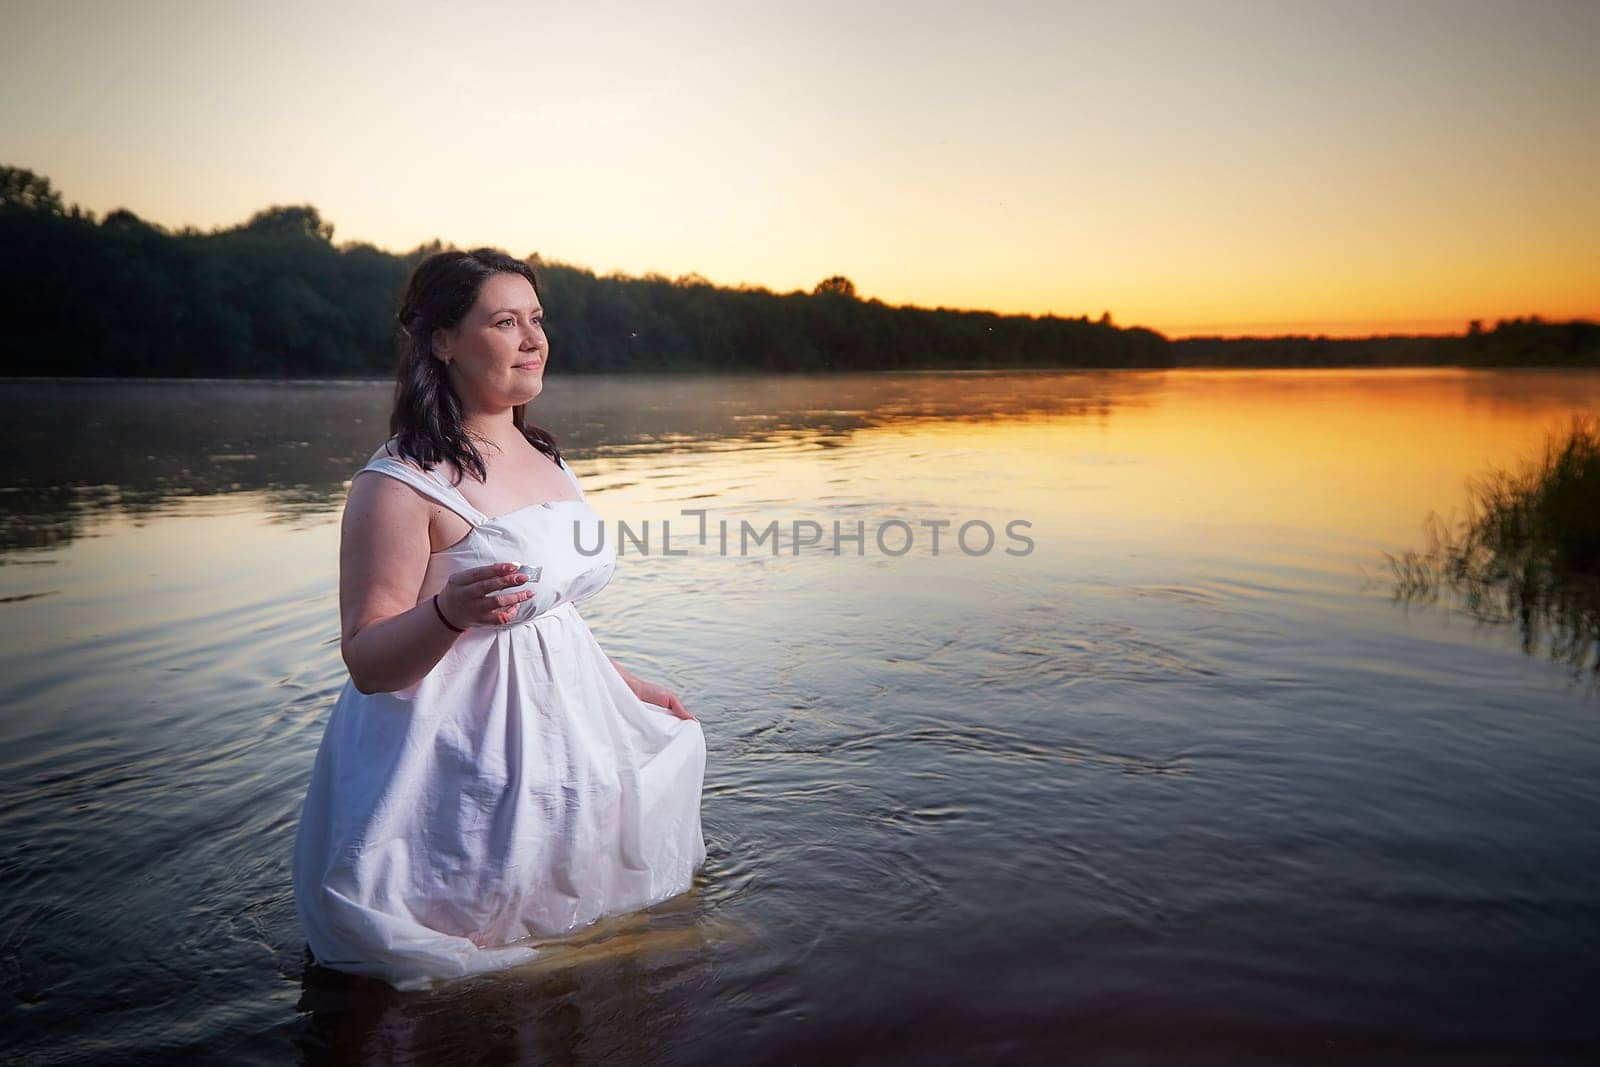 Slavic plump plump chubby girl in long white dress on the feast of Ivan Kupala with flowers and water in a river or lake on a summer evening by keleny